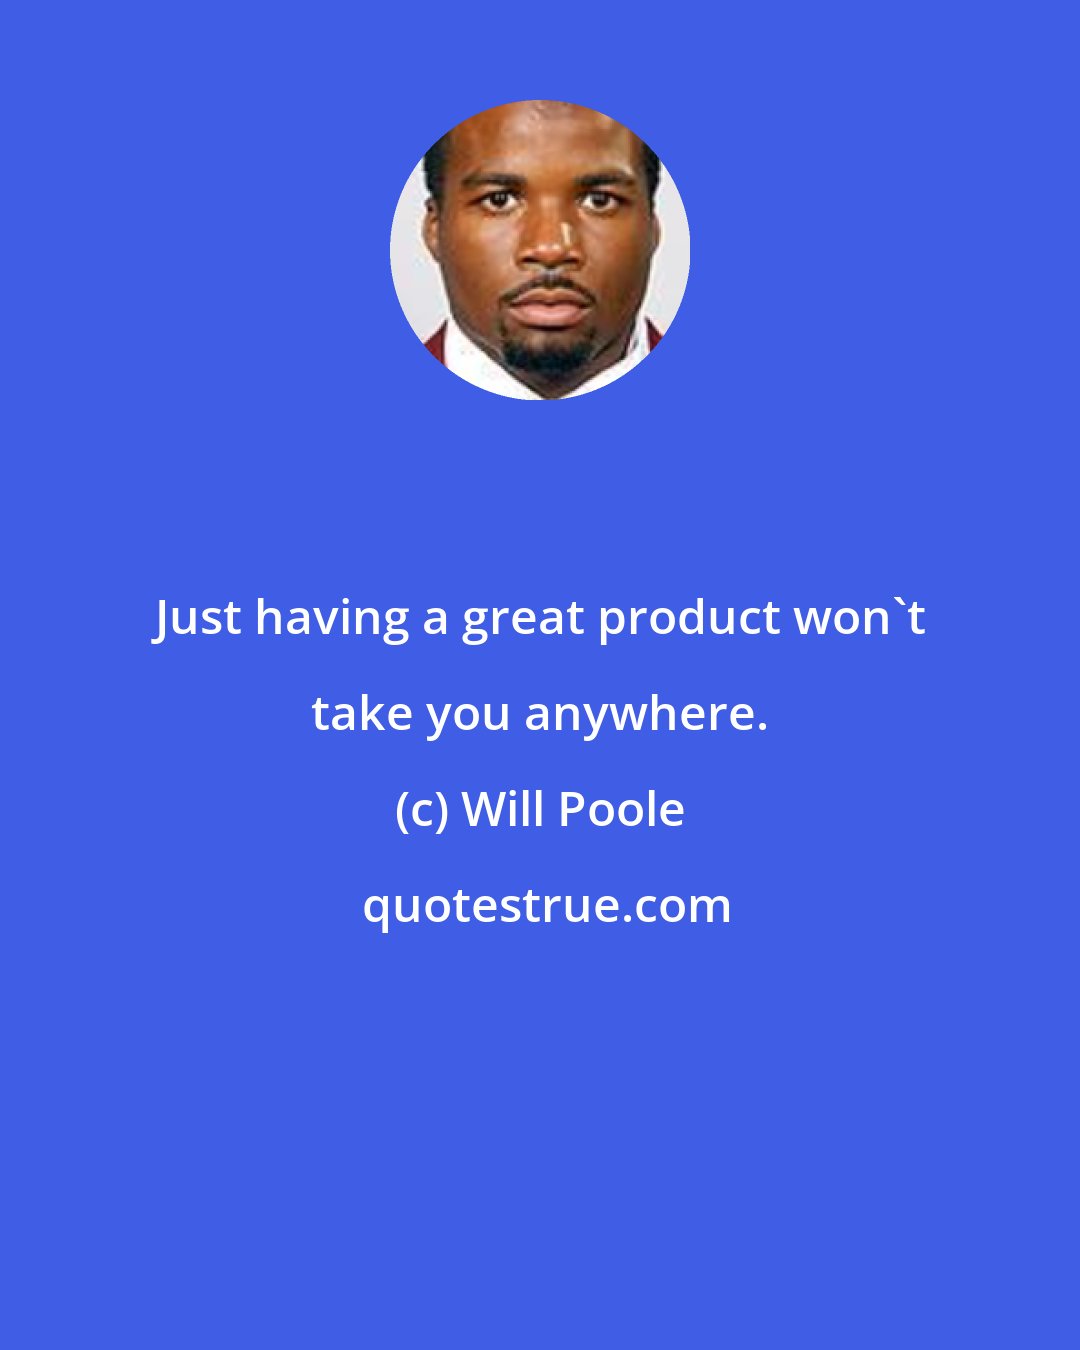 Will Poole: Just having a great product won't take you anywhere.